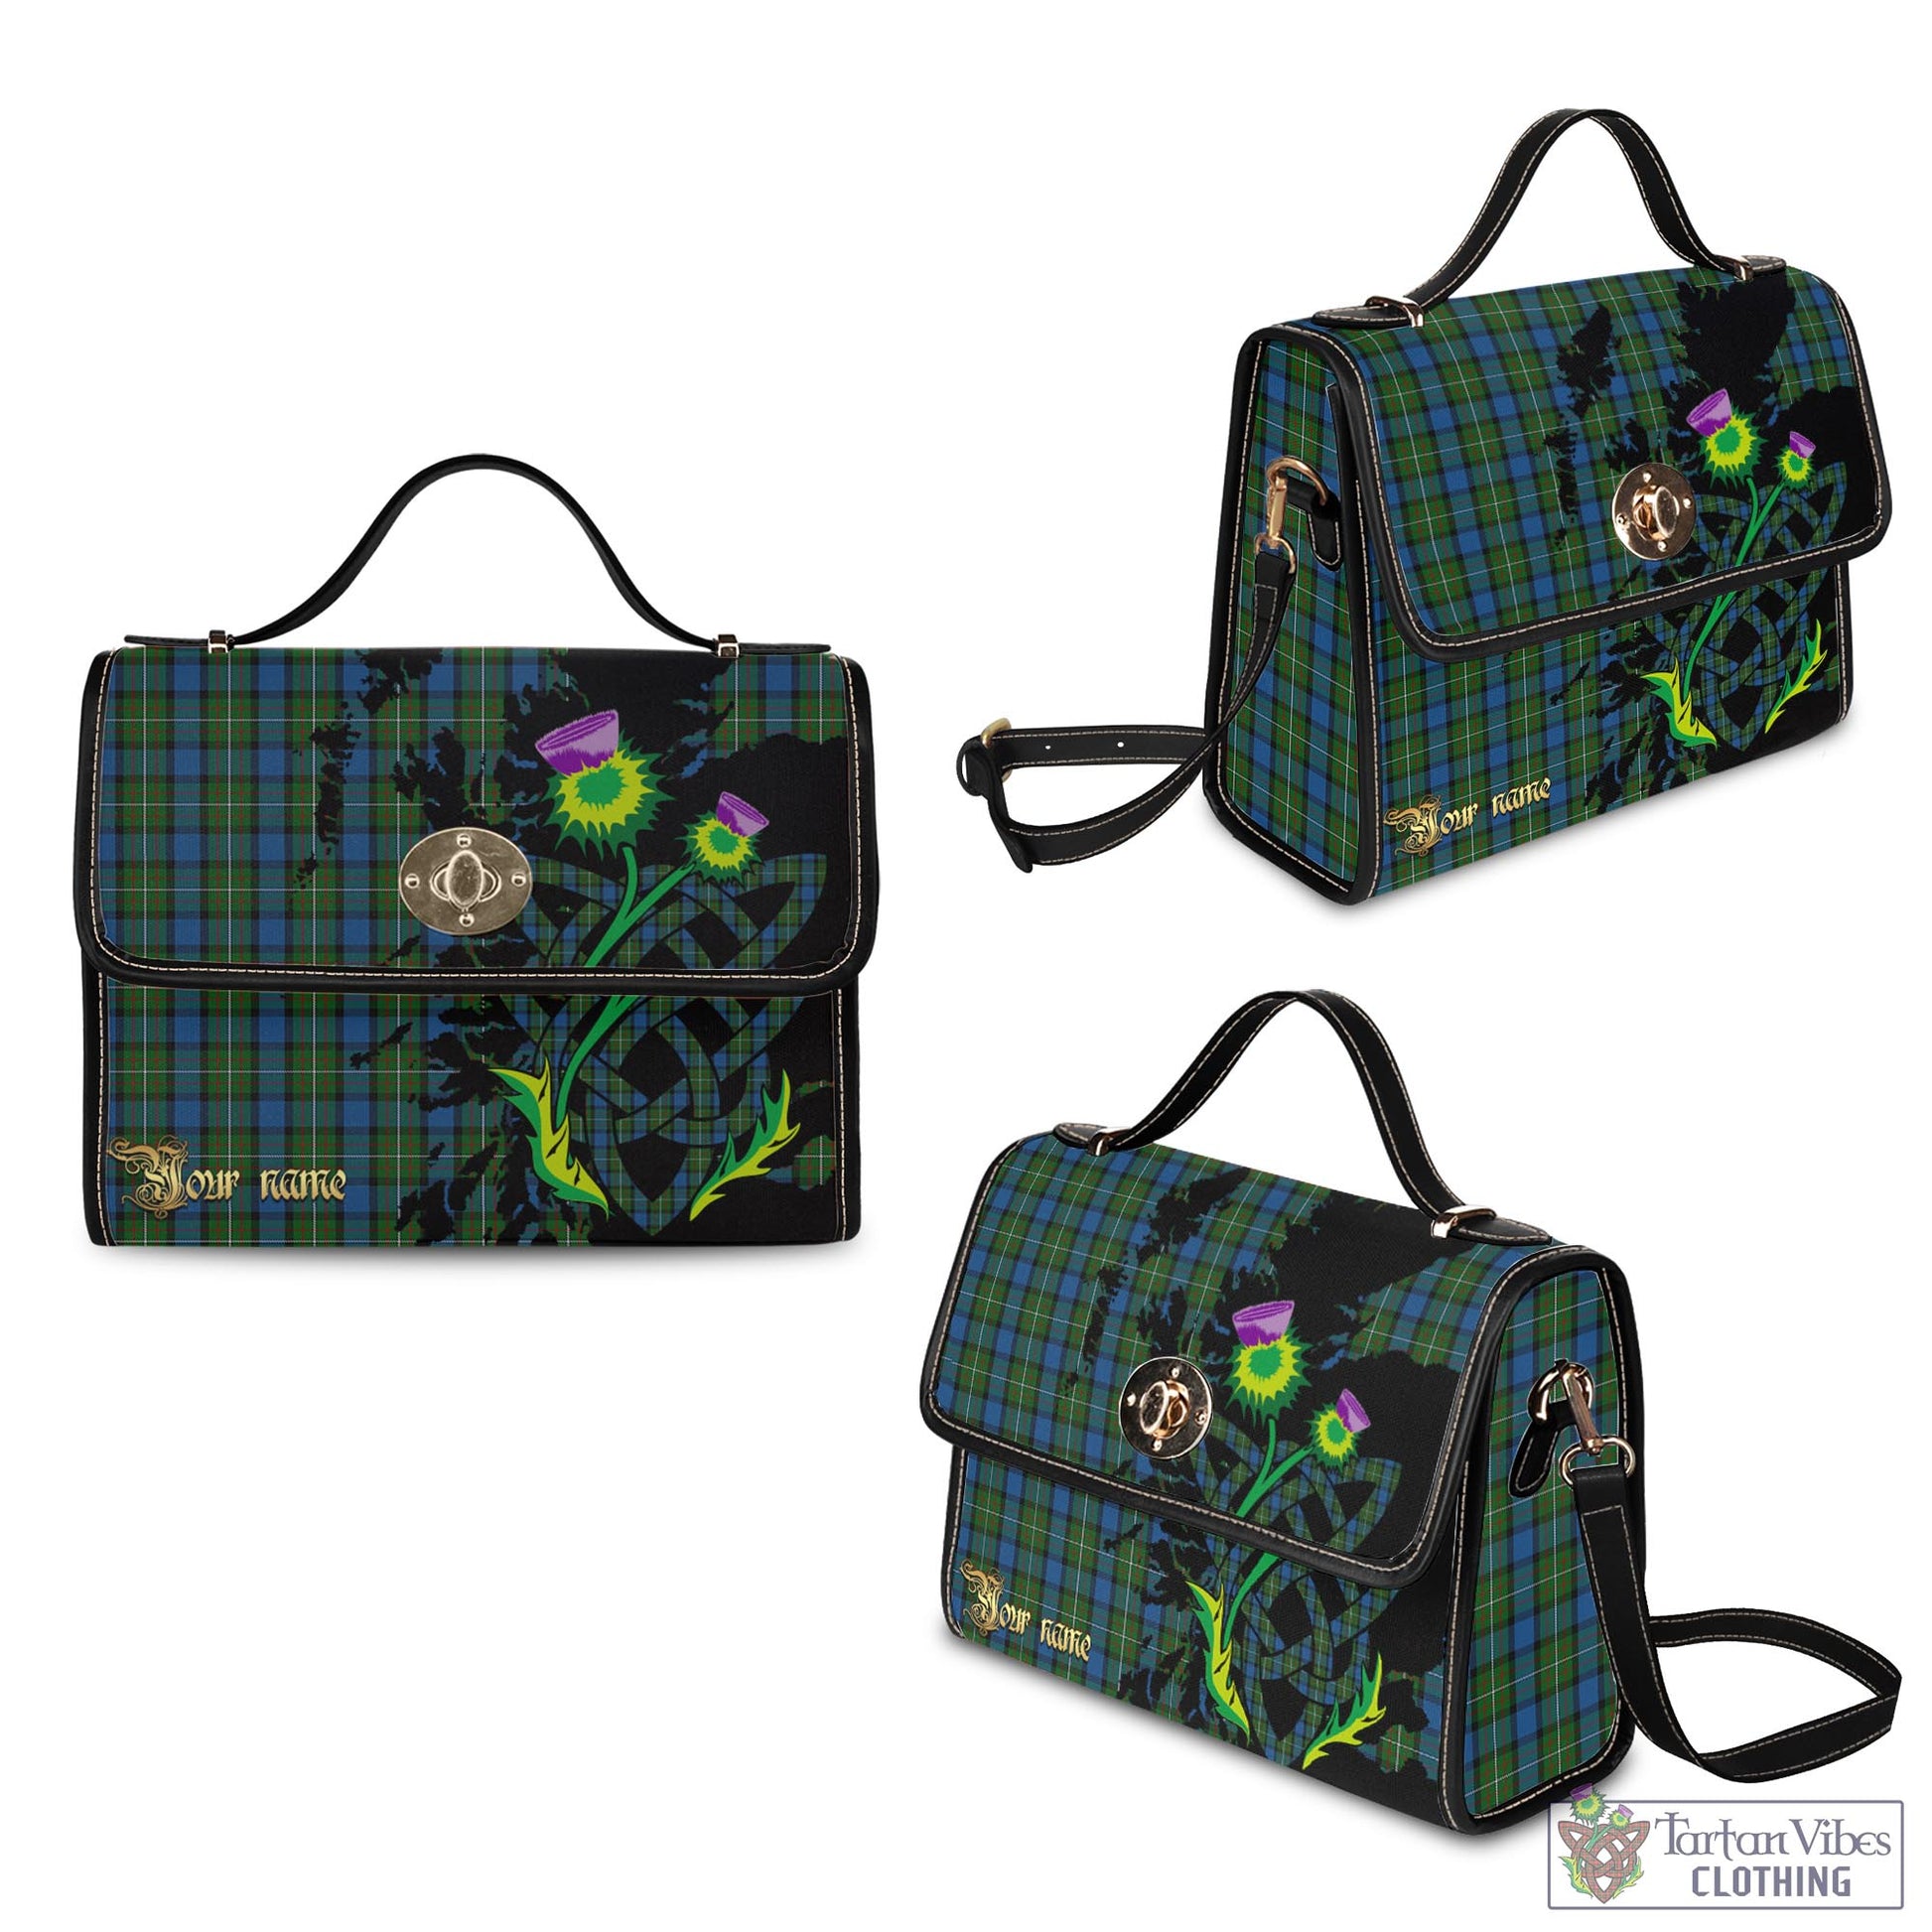 Tartan Vibes Clothing Ferguson of Atholl Tartan Waterproof Canvas Bag with Scotland Map and Thistle Celtic Accents